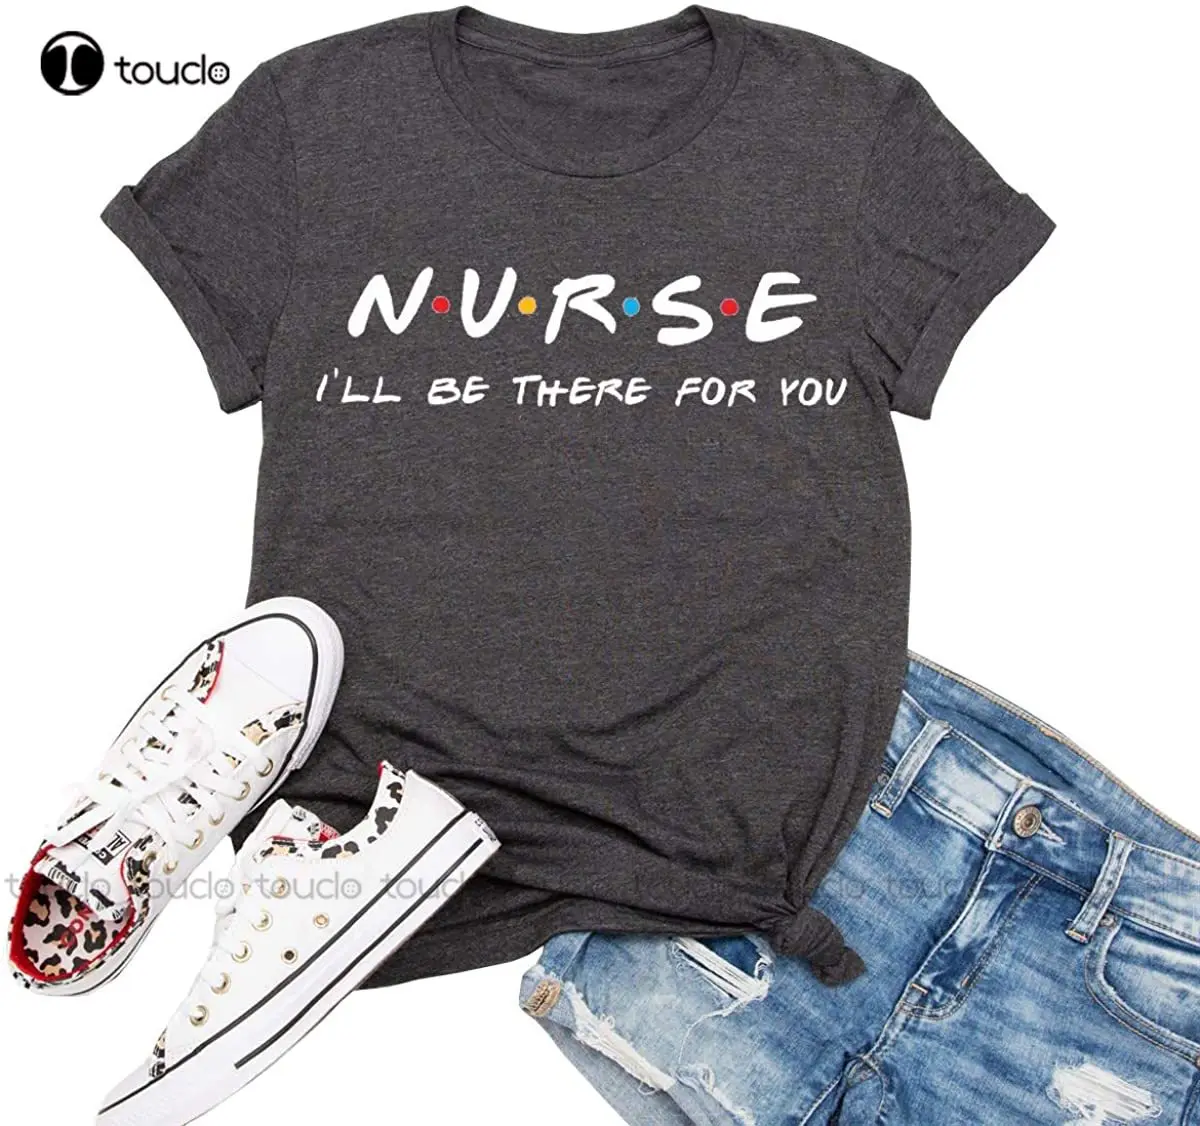 

Nurse I'Ll Be There For You T-Shirt Womens Cute Short Sleeve Nurse Medicall Graphic Tees Tops Birthday Boy Shirt Cotton Tee